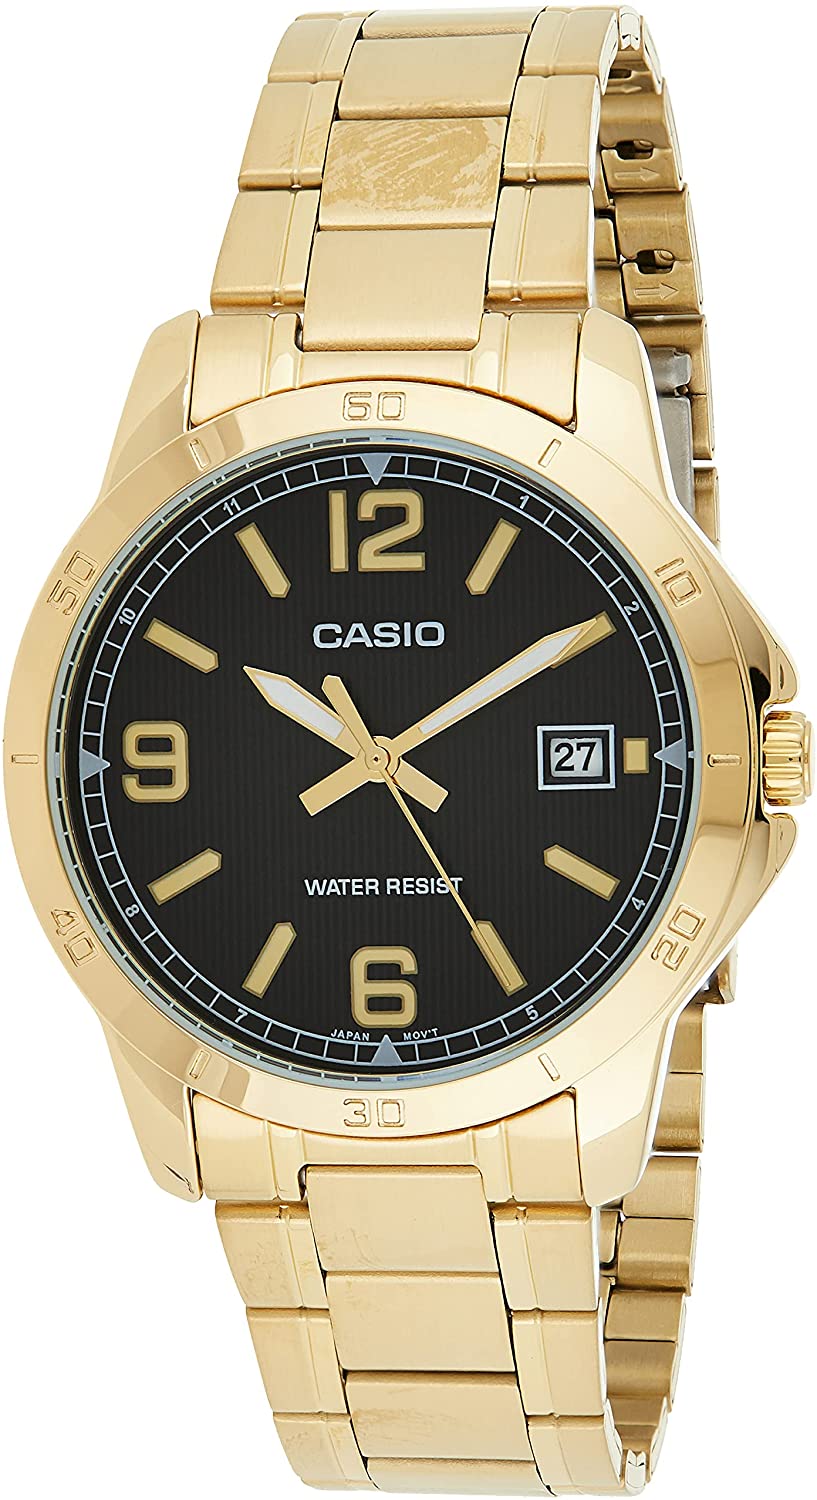 Casio Men's Dress Gold Tone Stainless Steel Black Dial Analog Date Watch